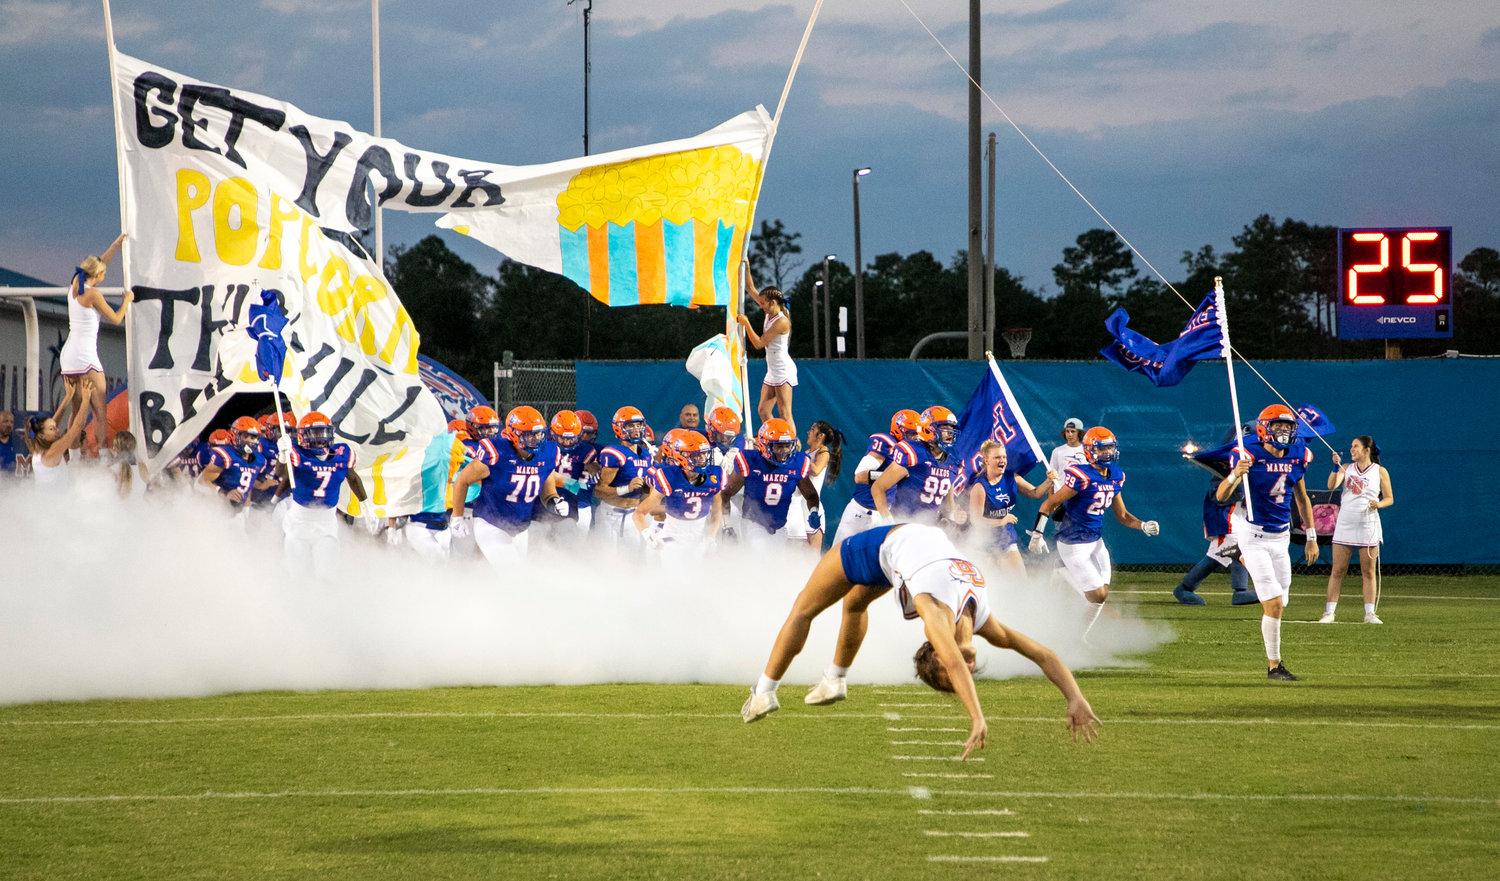 The Orange Beach Makos take the field for their region battle against the T.R. Miller Tigers Sept. 16 at home. This week, Orange Beach travels to face St. Michael in a key contest within Class 4A Region 1.